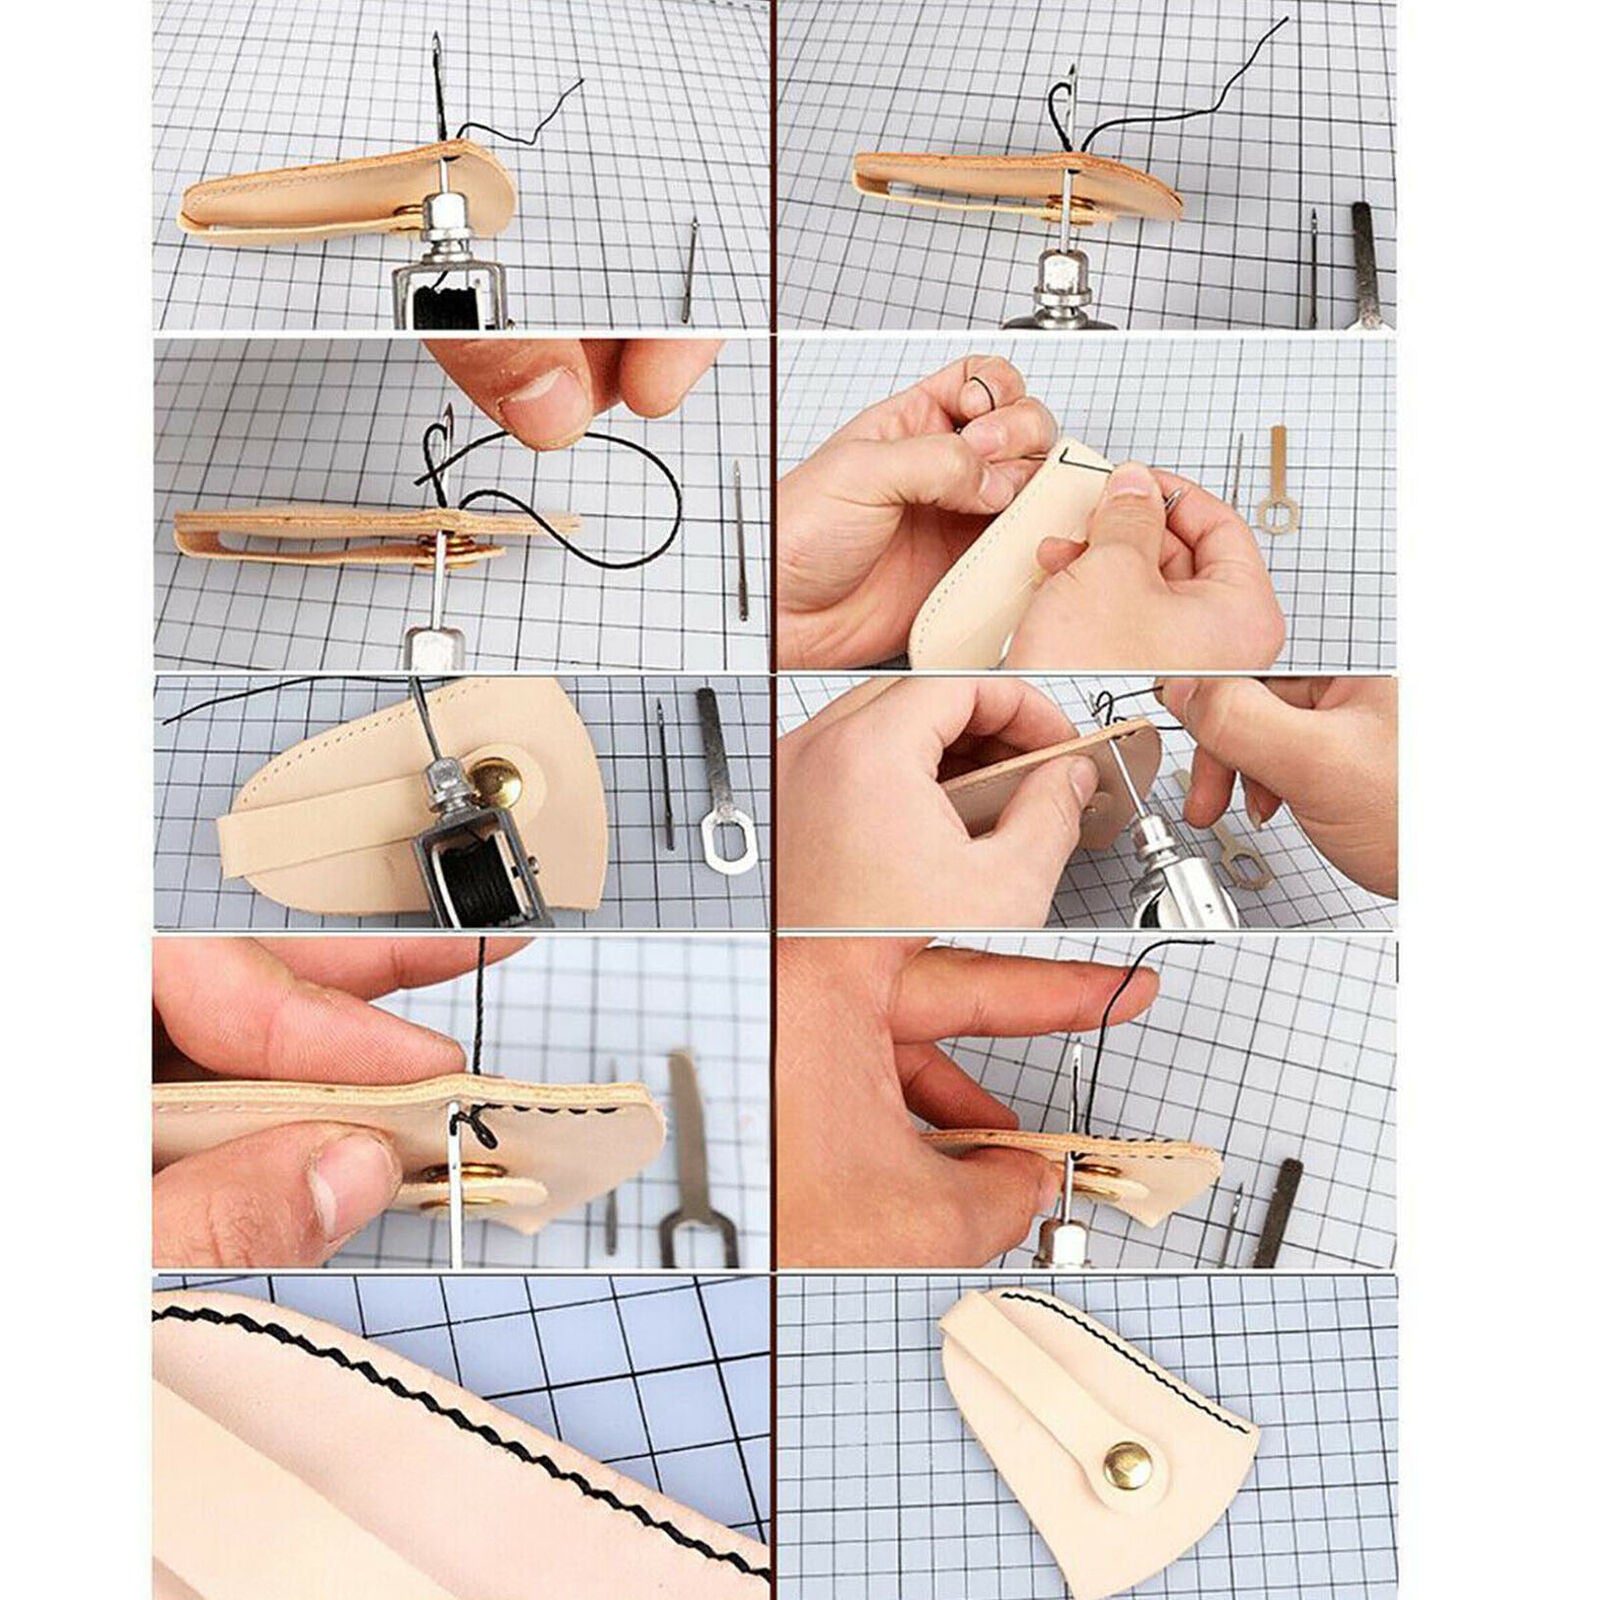 Leather Craft Automatic Lock Stitching Sewing Awl Tool+ Needle+Tightening Wrench